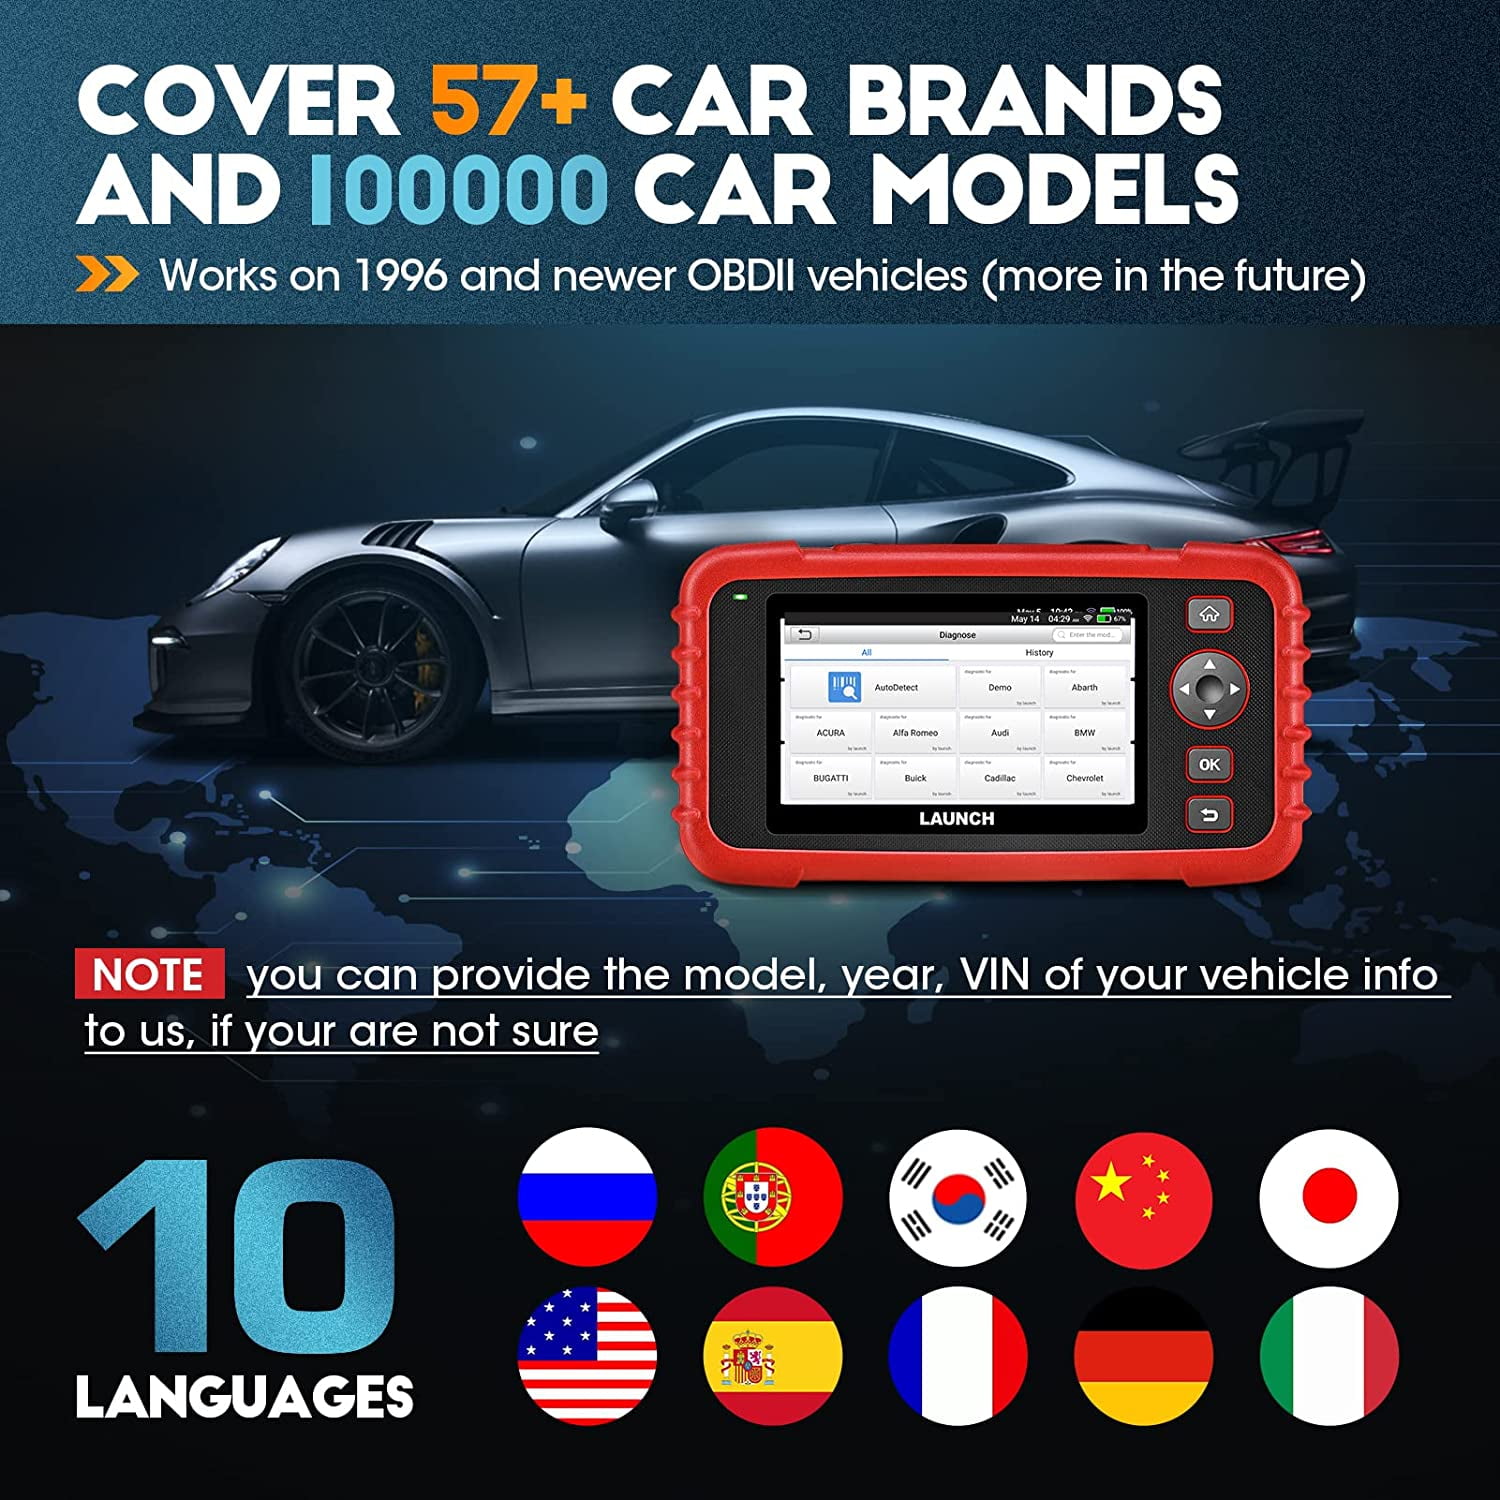 LAUNCH CRP123X OBD2 Code Reader for Engine Transmission ABS SRS Diagnostics  with AutoVIN Service Lifetime Free Update Online